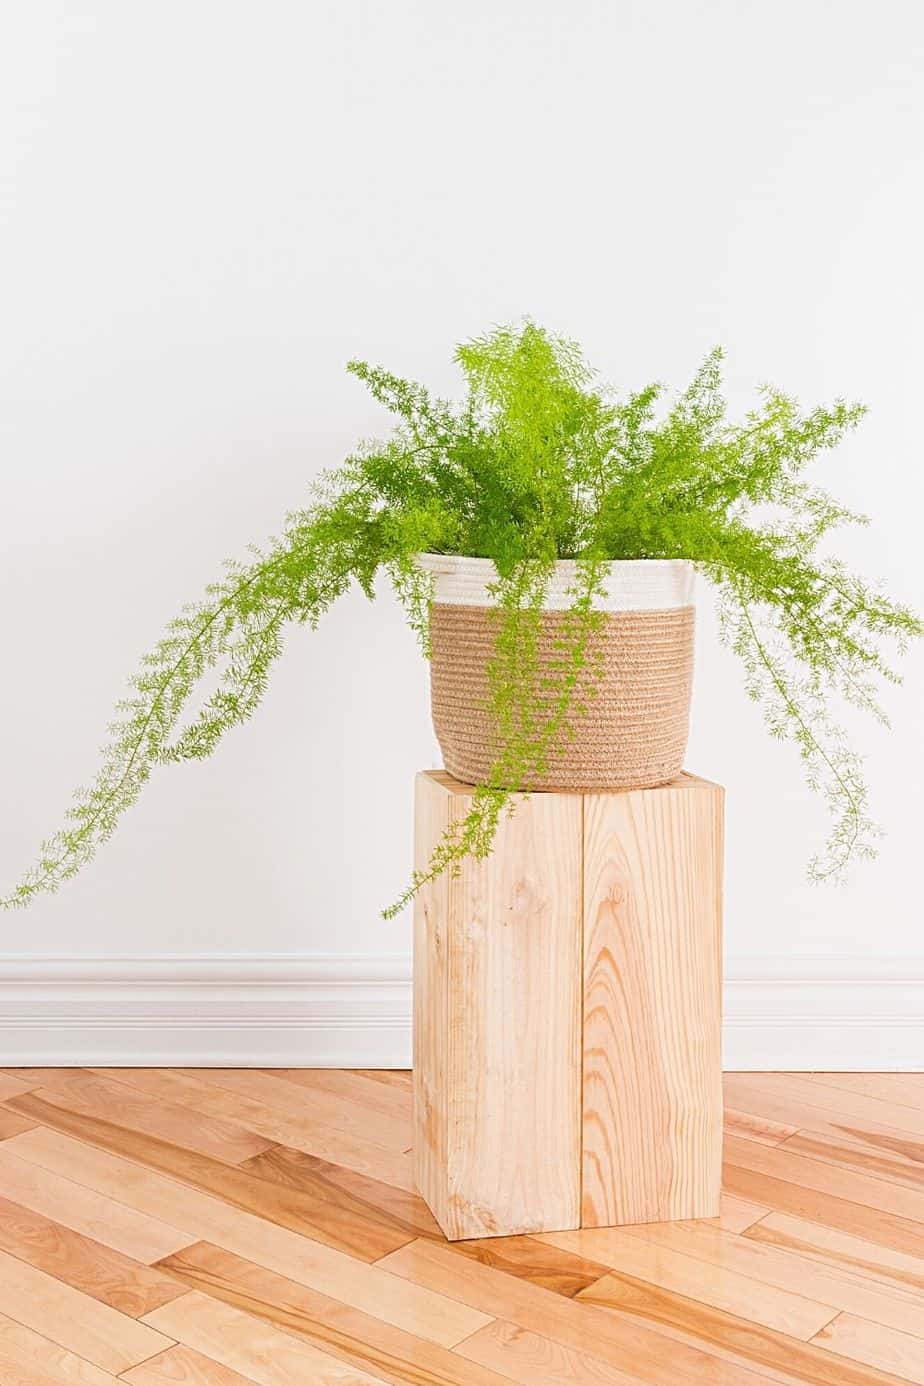 Asparagus Fern is another plant that grows well in water but is toxic for pets and kids